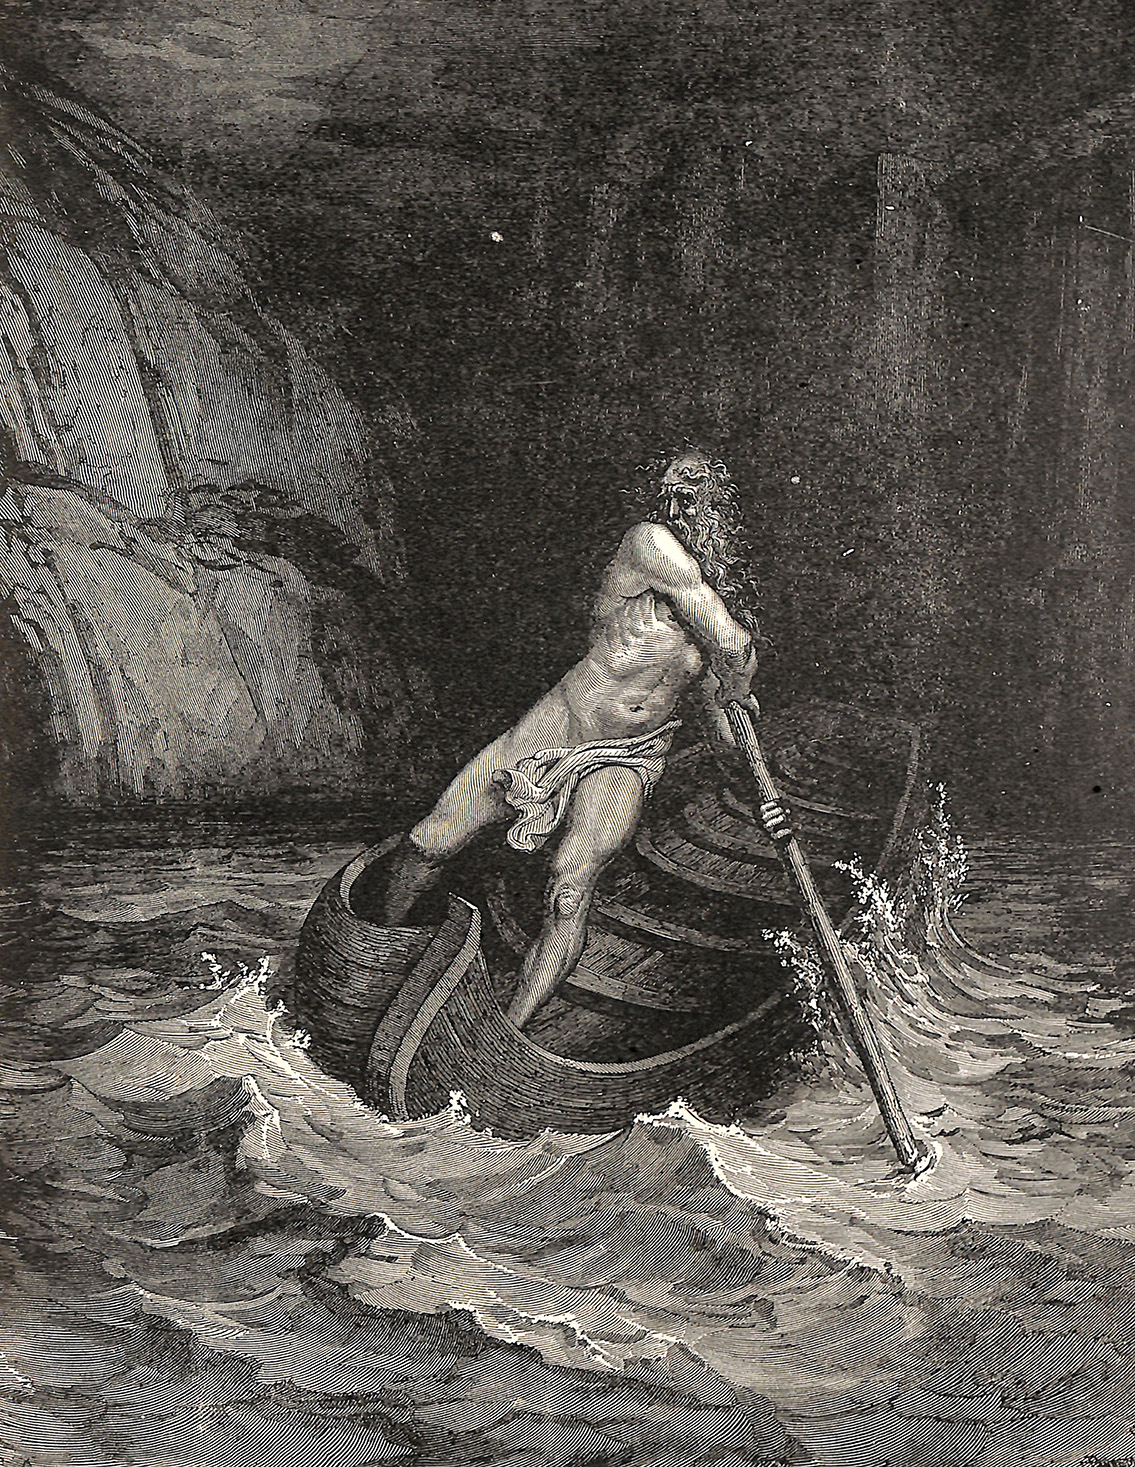 The river Styx